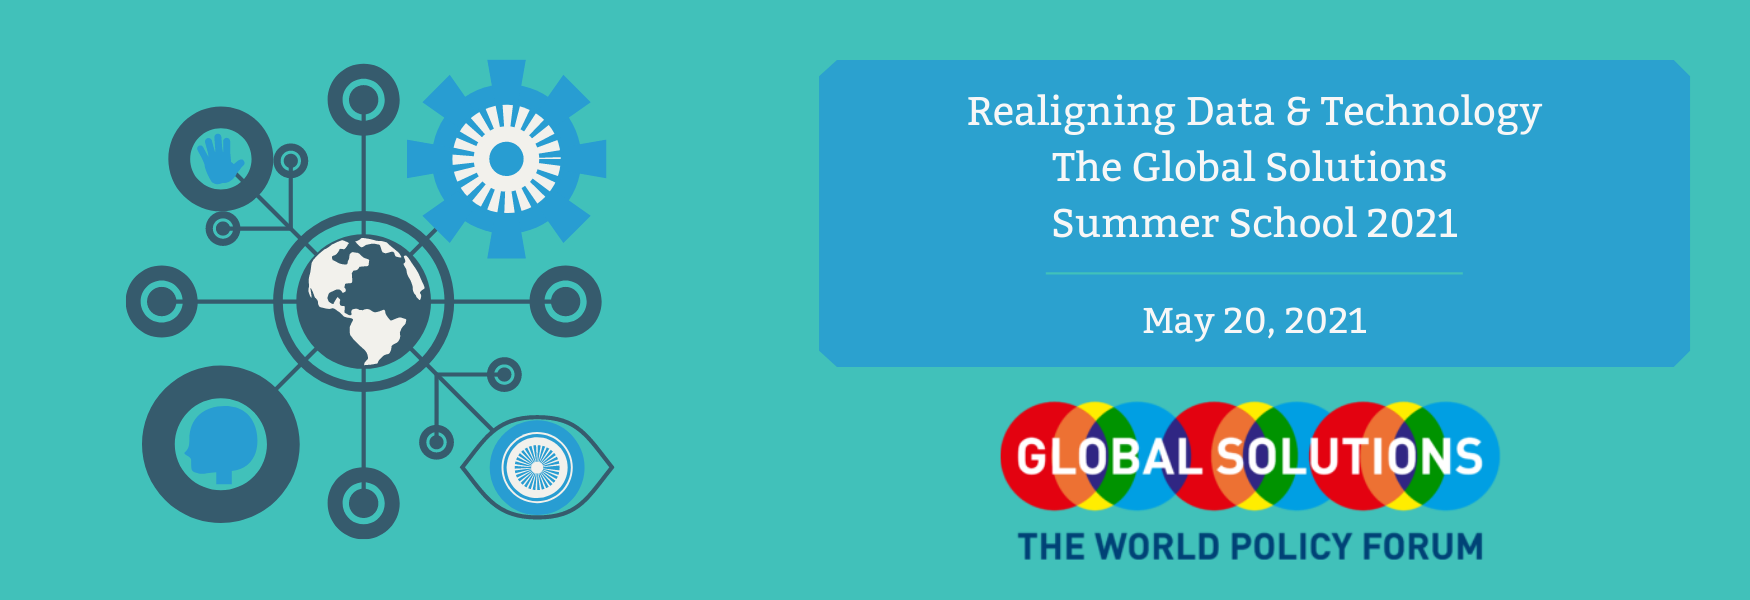 Realigning Data and Technology at the Global Solutions Summer School 2021